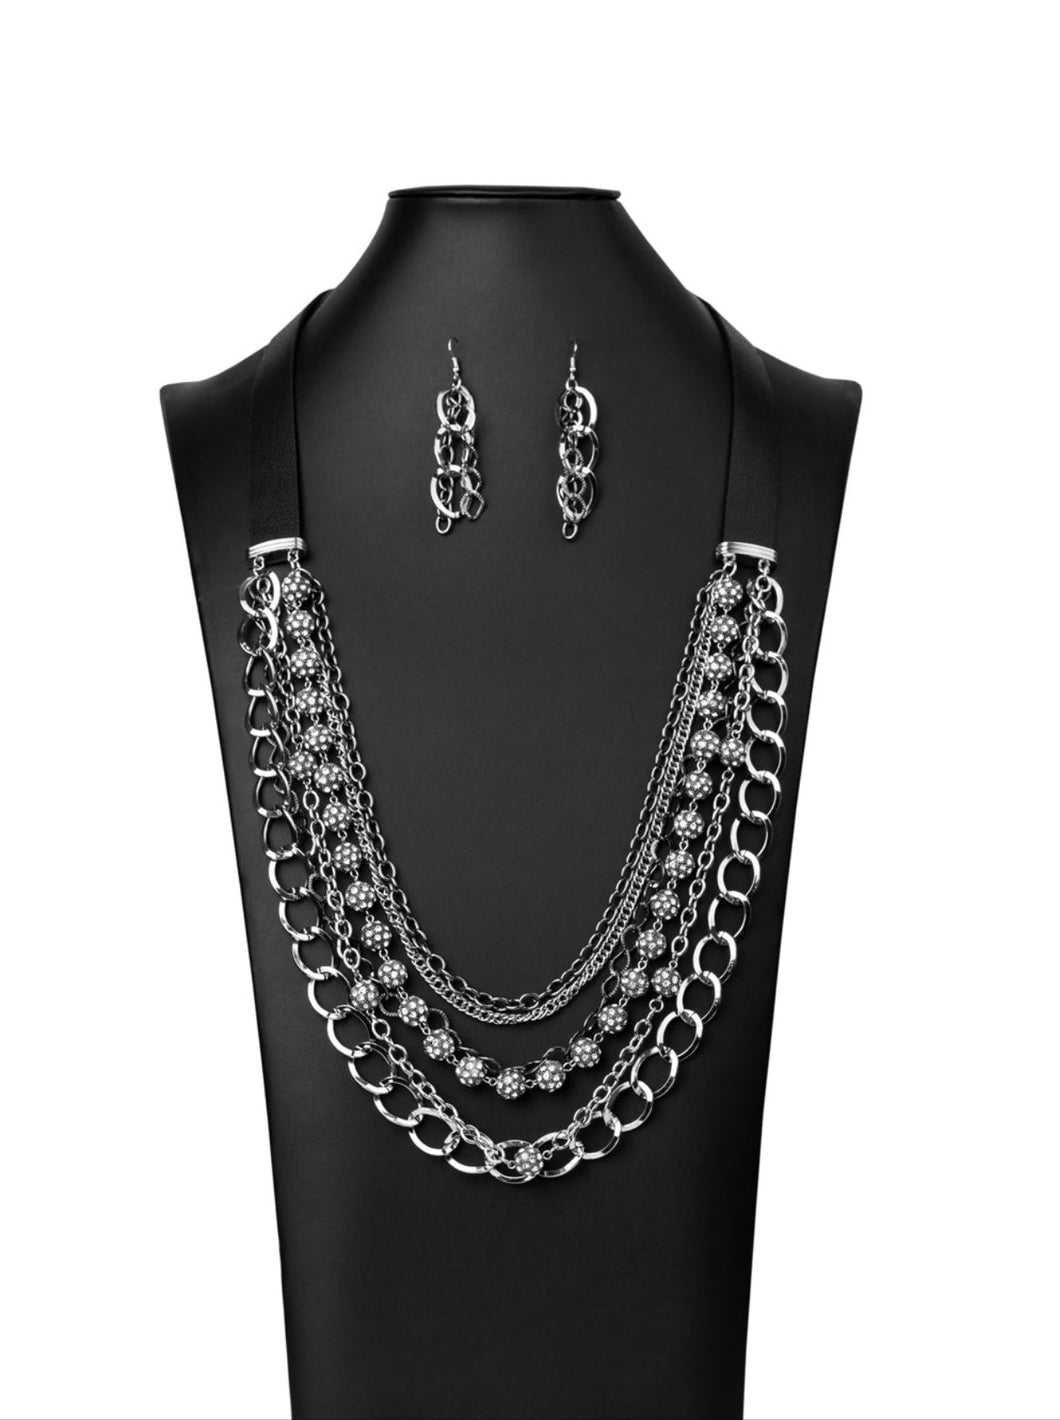 The Arlingto 2020 Signature Zi Collection Necklace and Earrings